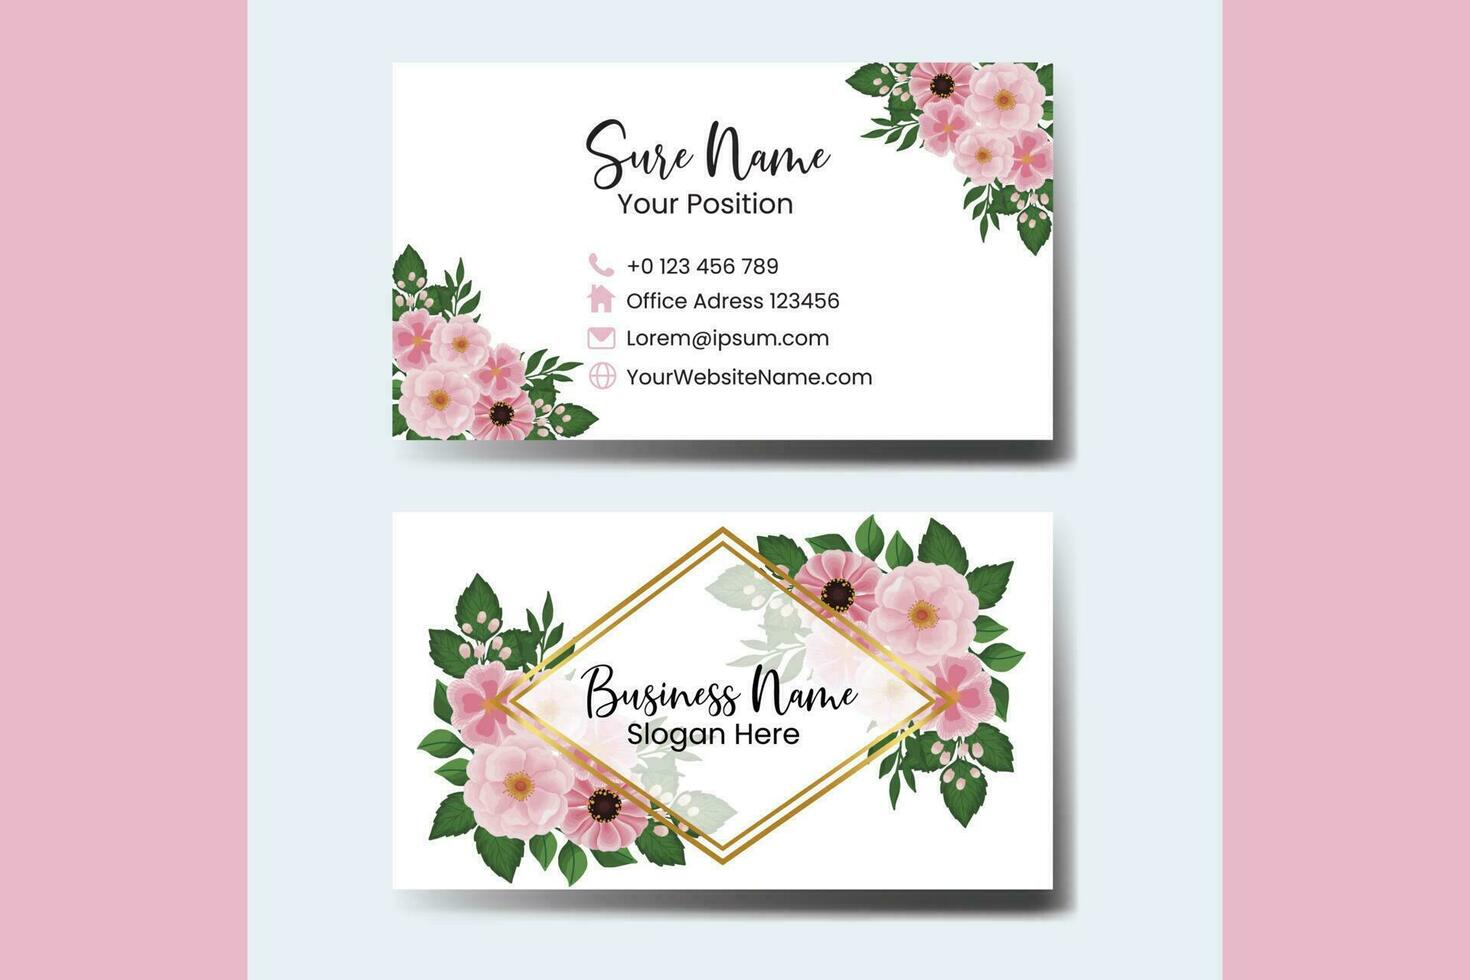 Business Card Template Pink Flower .Double-sided Blue Colors. Flat Design Vector Illustration. Stationery Design